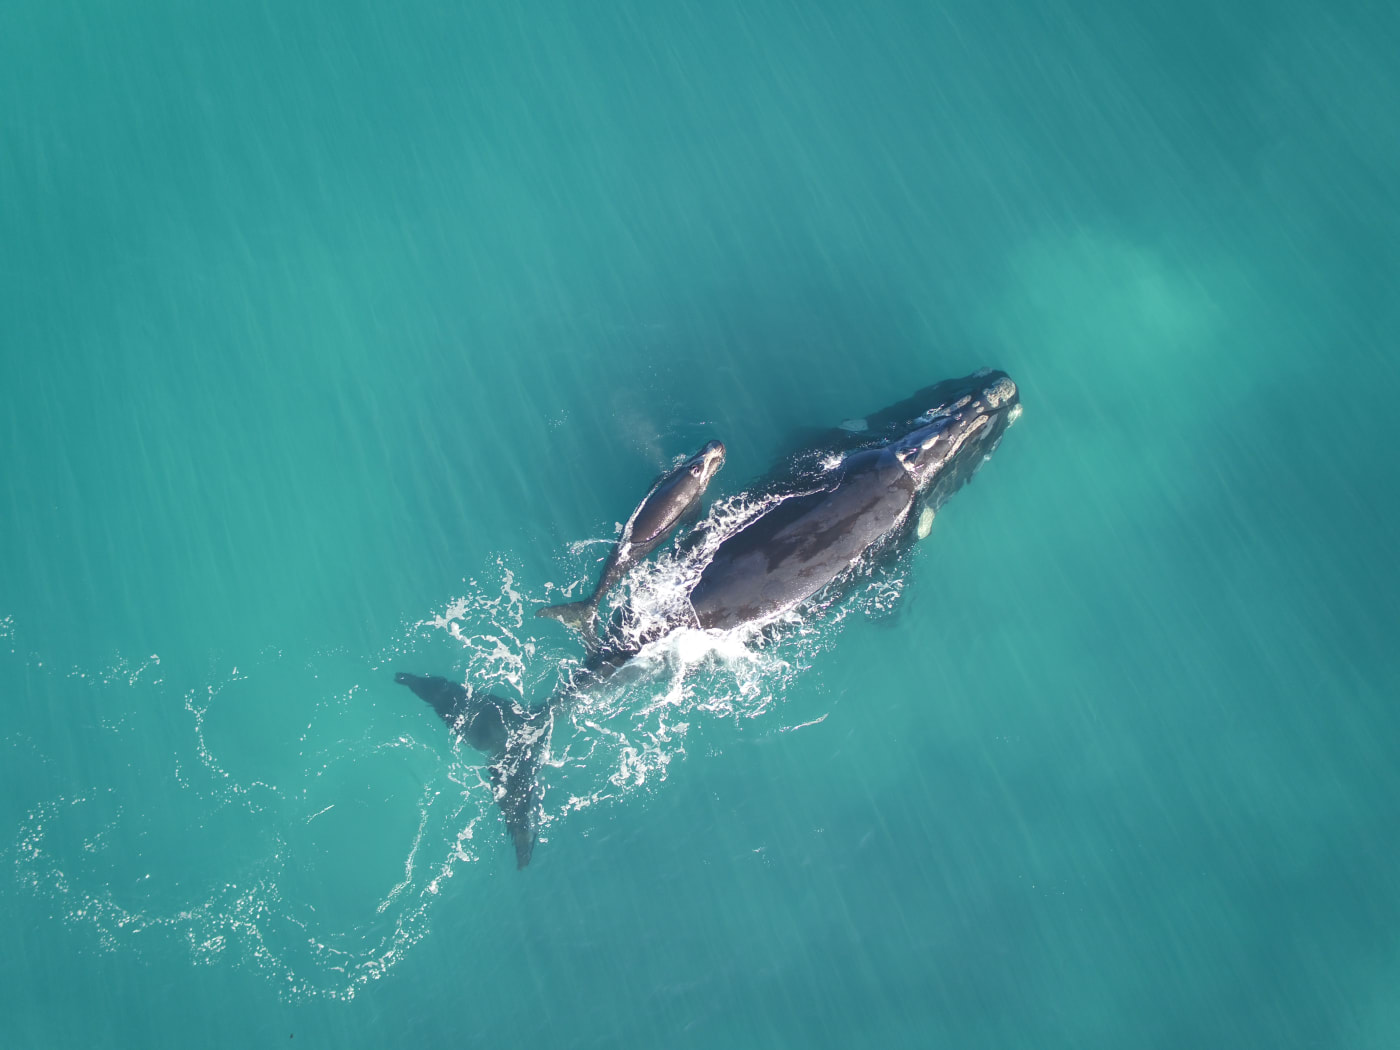 Southern right whale and calf along the coast of the Head of the BIght, South Australia.